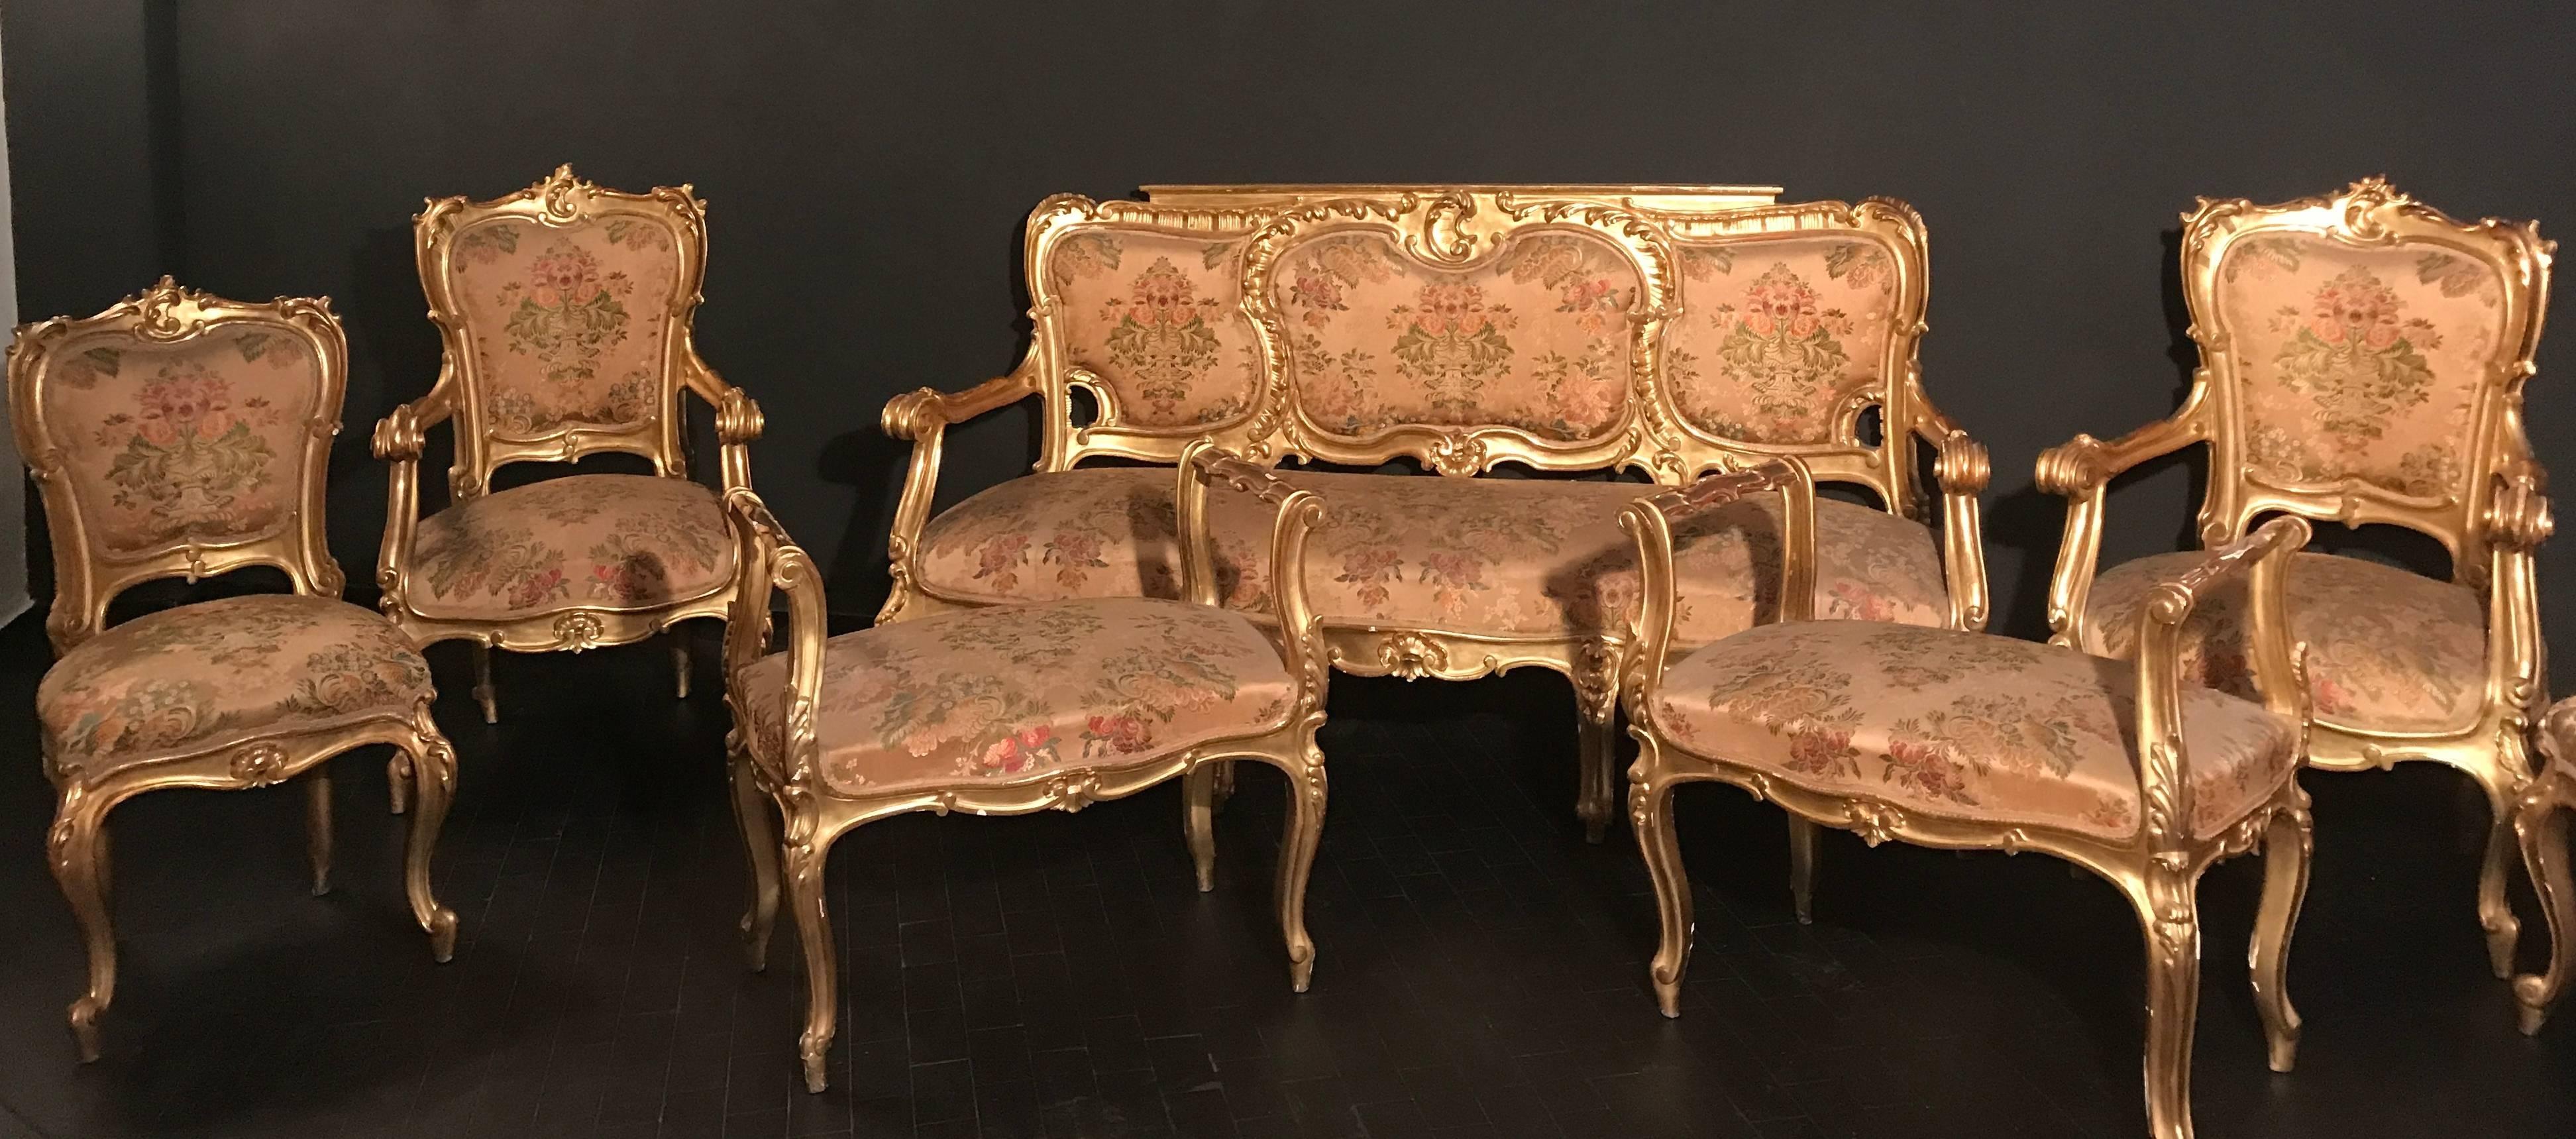 This magnificent and finely carved suite comprising of one sofa, two armchairs, two single chairs, Two window benches and four benches with original gilding.
Provenience from a Sicilian Aristocratic residence
Sofa measurements:
Height
Width 185